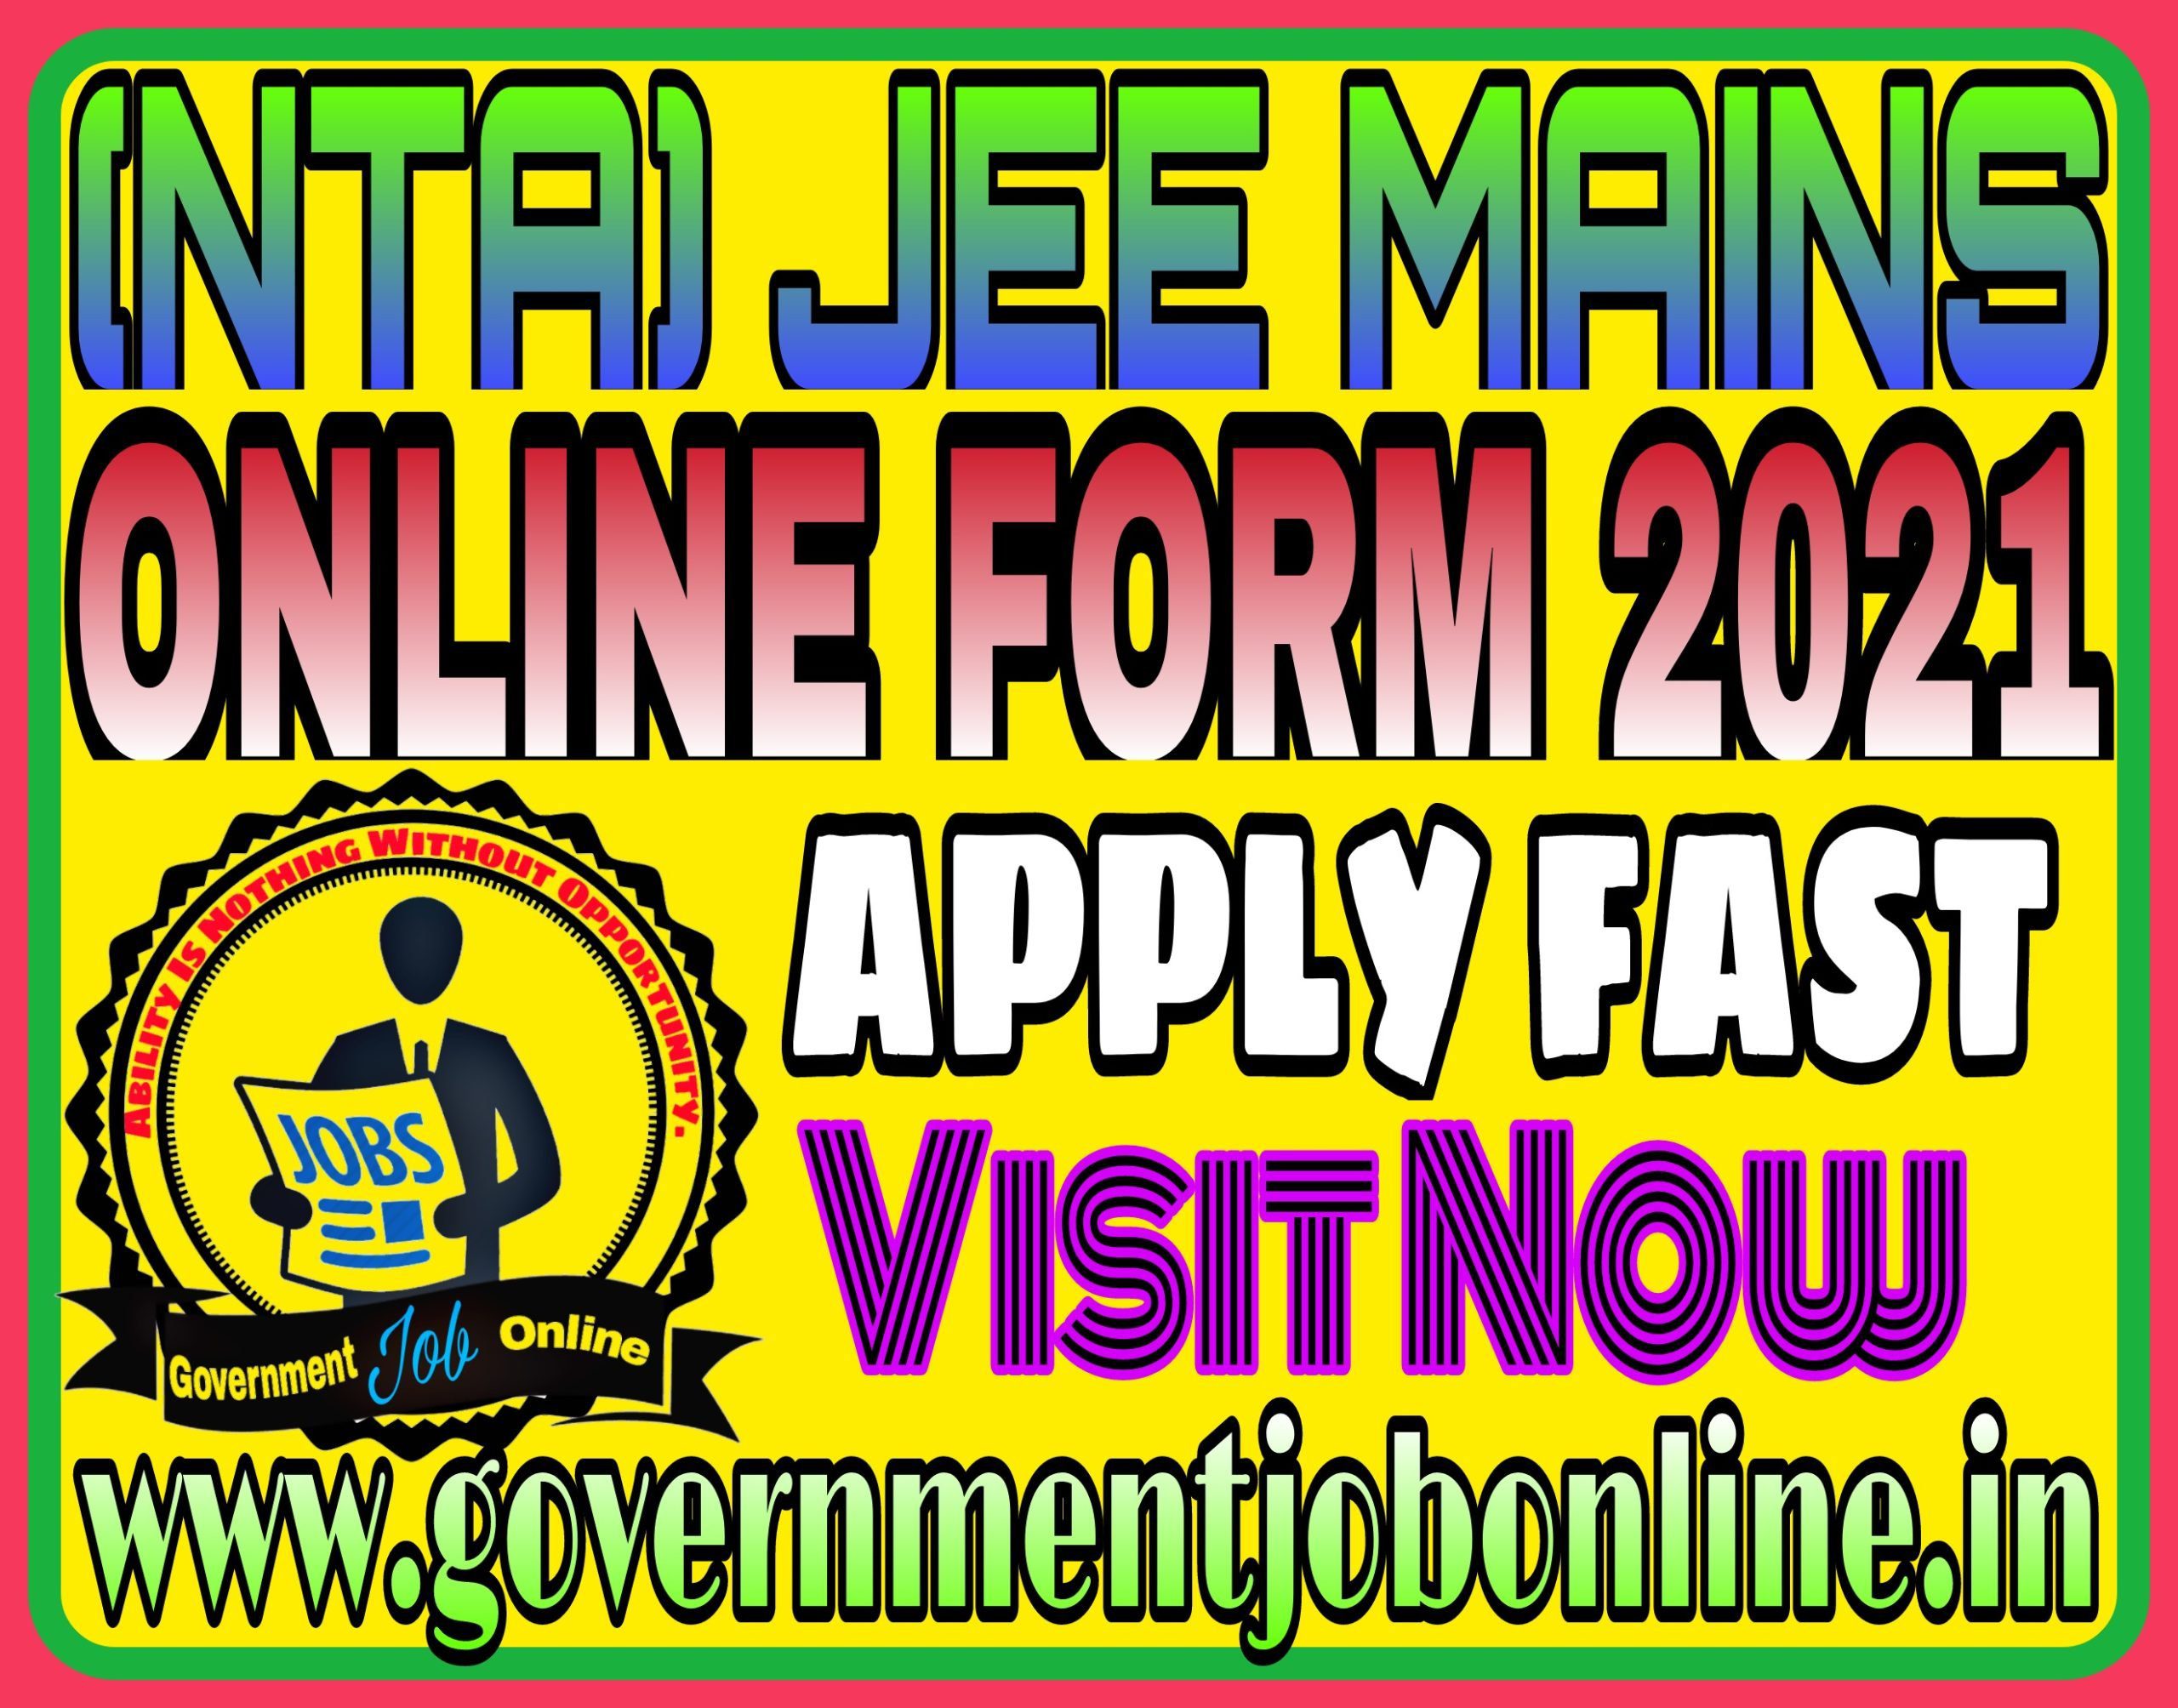 NTA JEE Mains Online Form 2021, NTA JEE Mains Phase II Online Form 2021